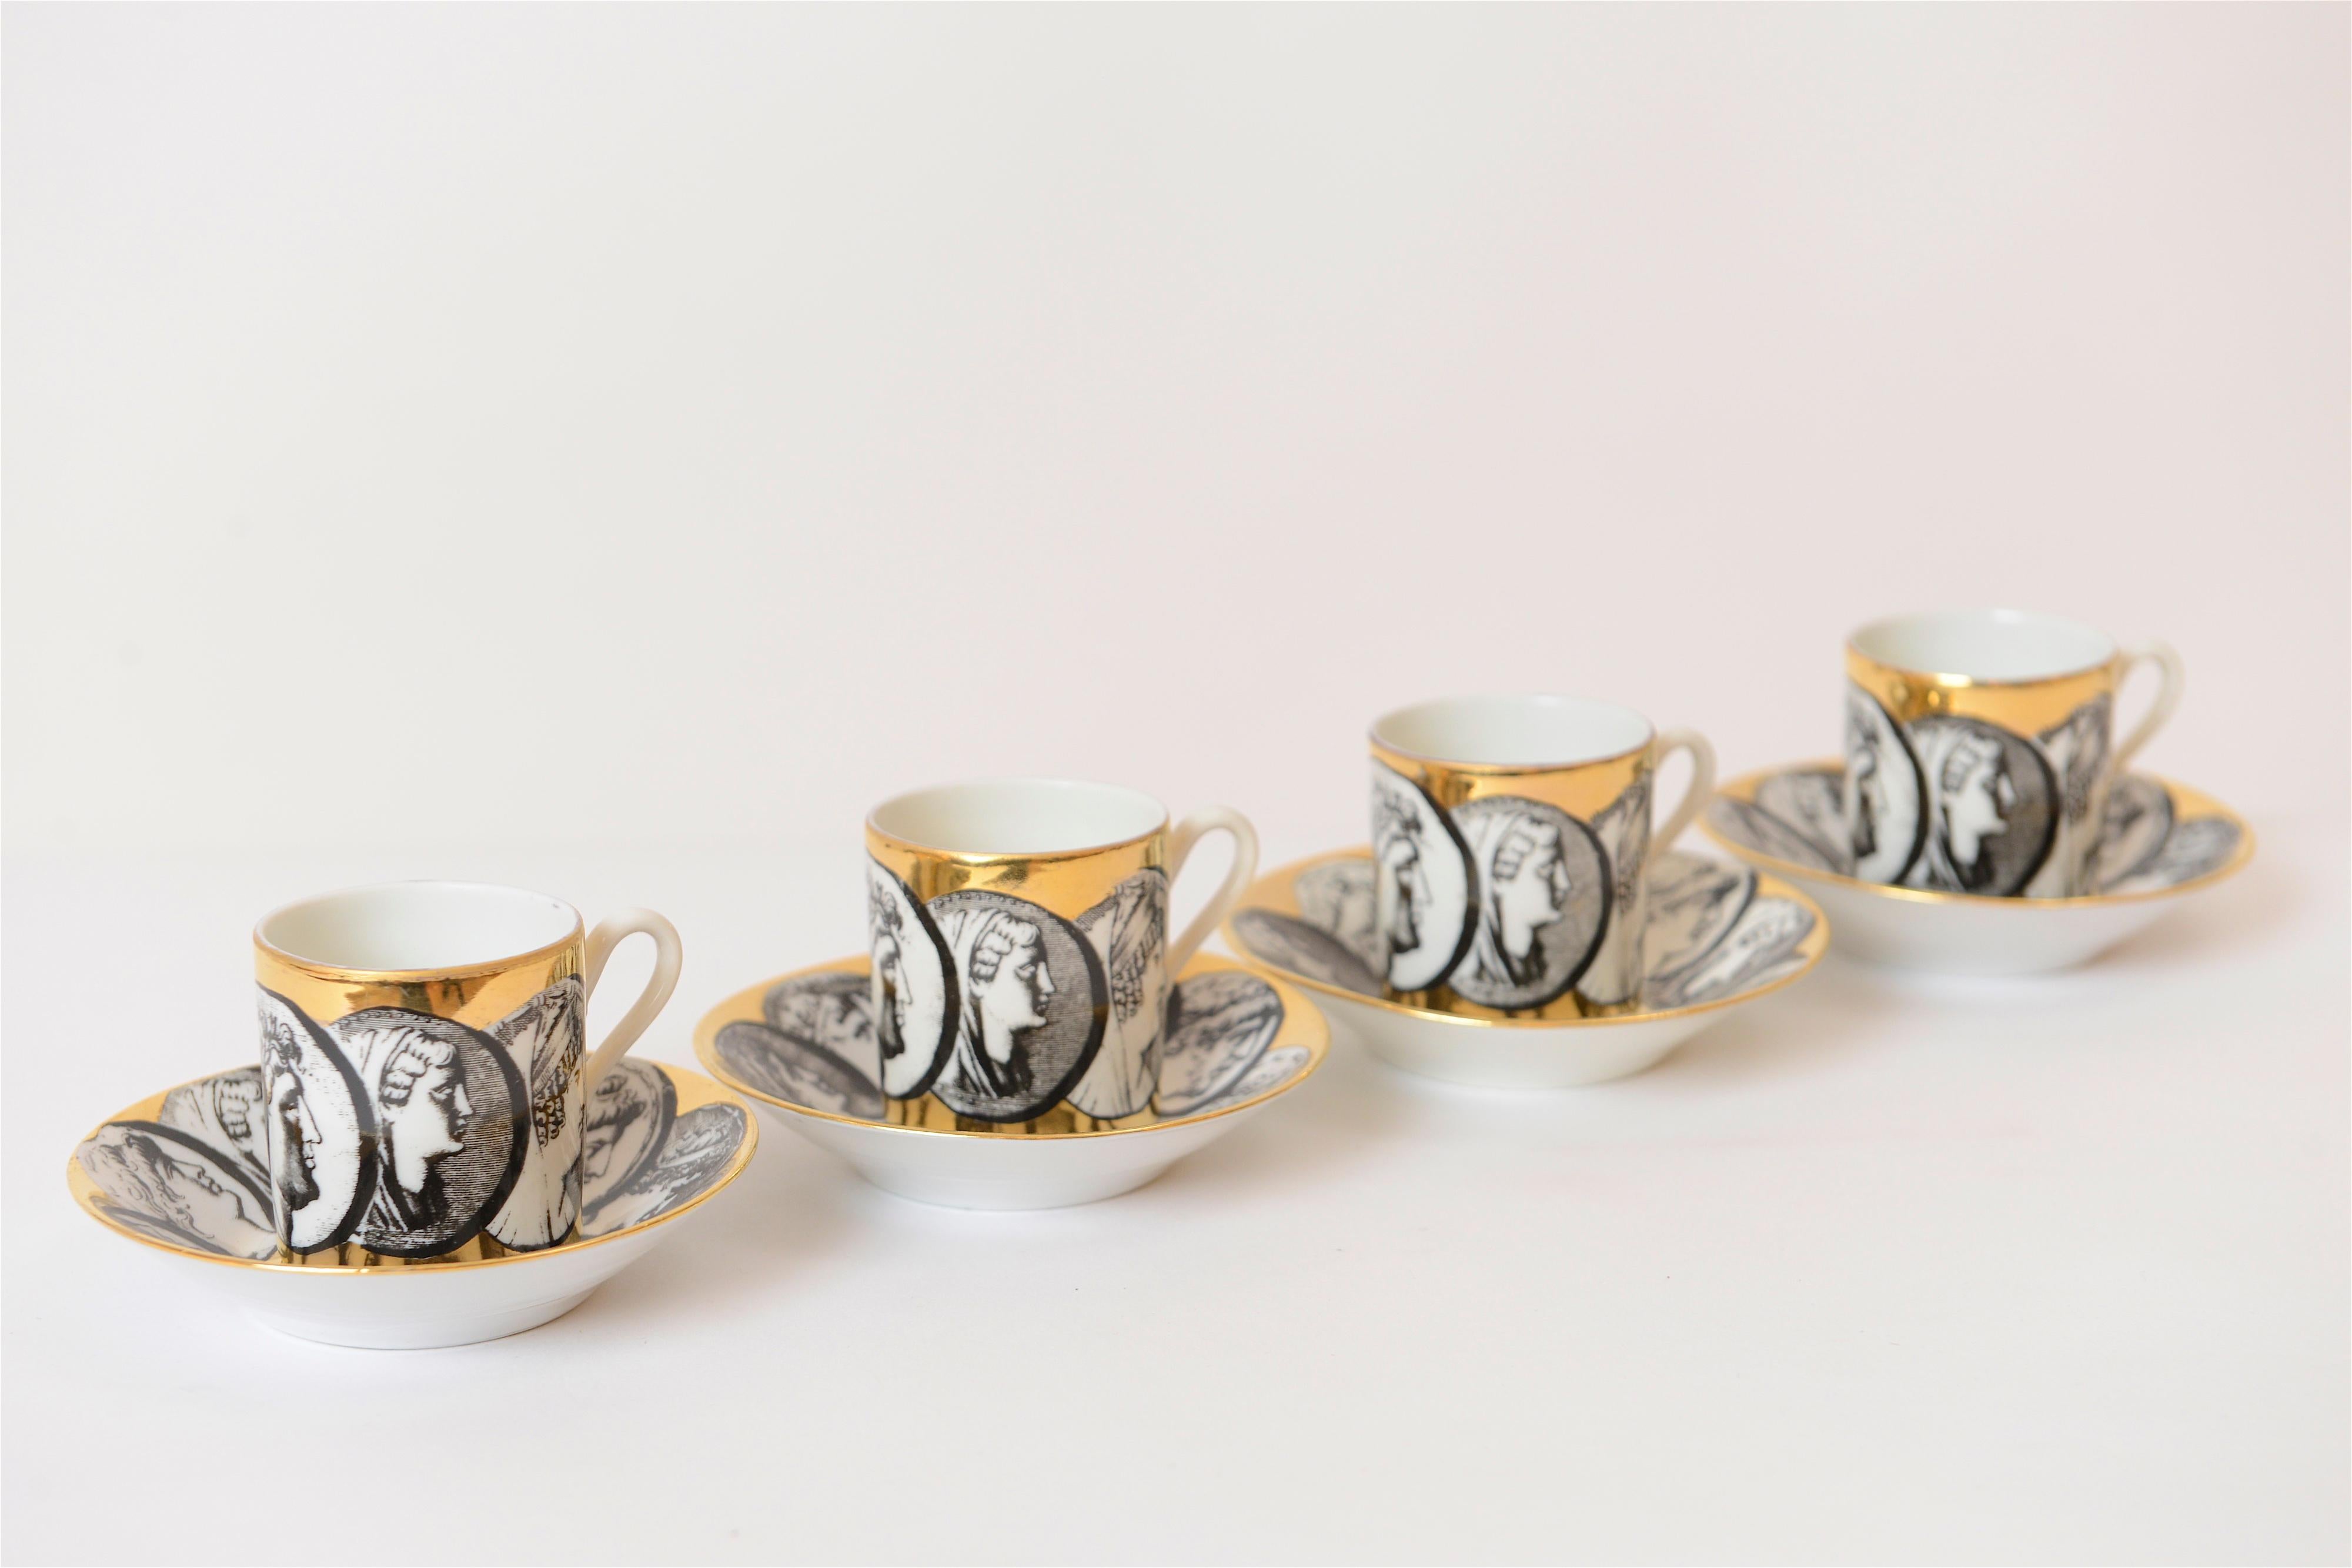 European 1950s Piero Fornasetti ‘Cammei’ Espresso Cups and Saucers, Italy